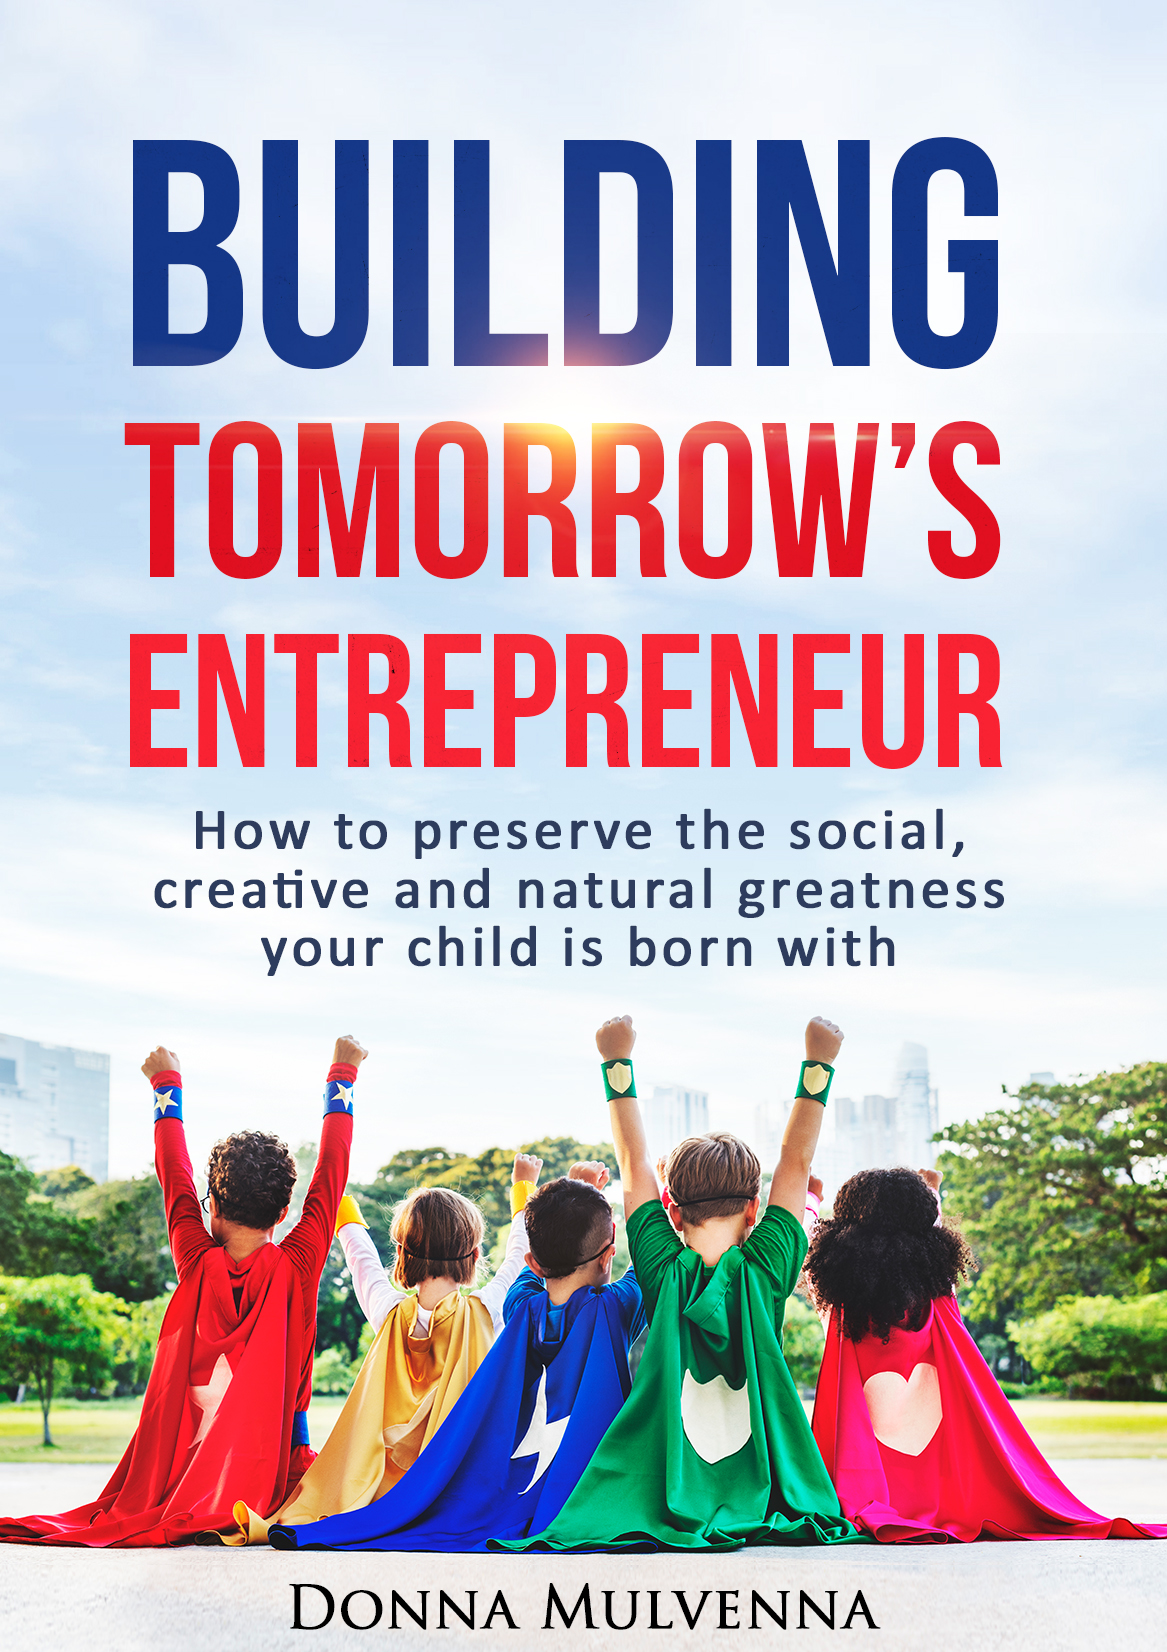 FREE: BUILDING TOMORROW’S ENTREPRENEUR: How to preserve the social, creative and natural greatness your child is born with by Donna Mulvenna